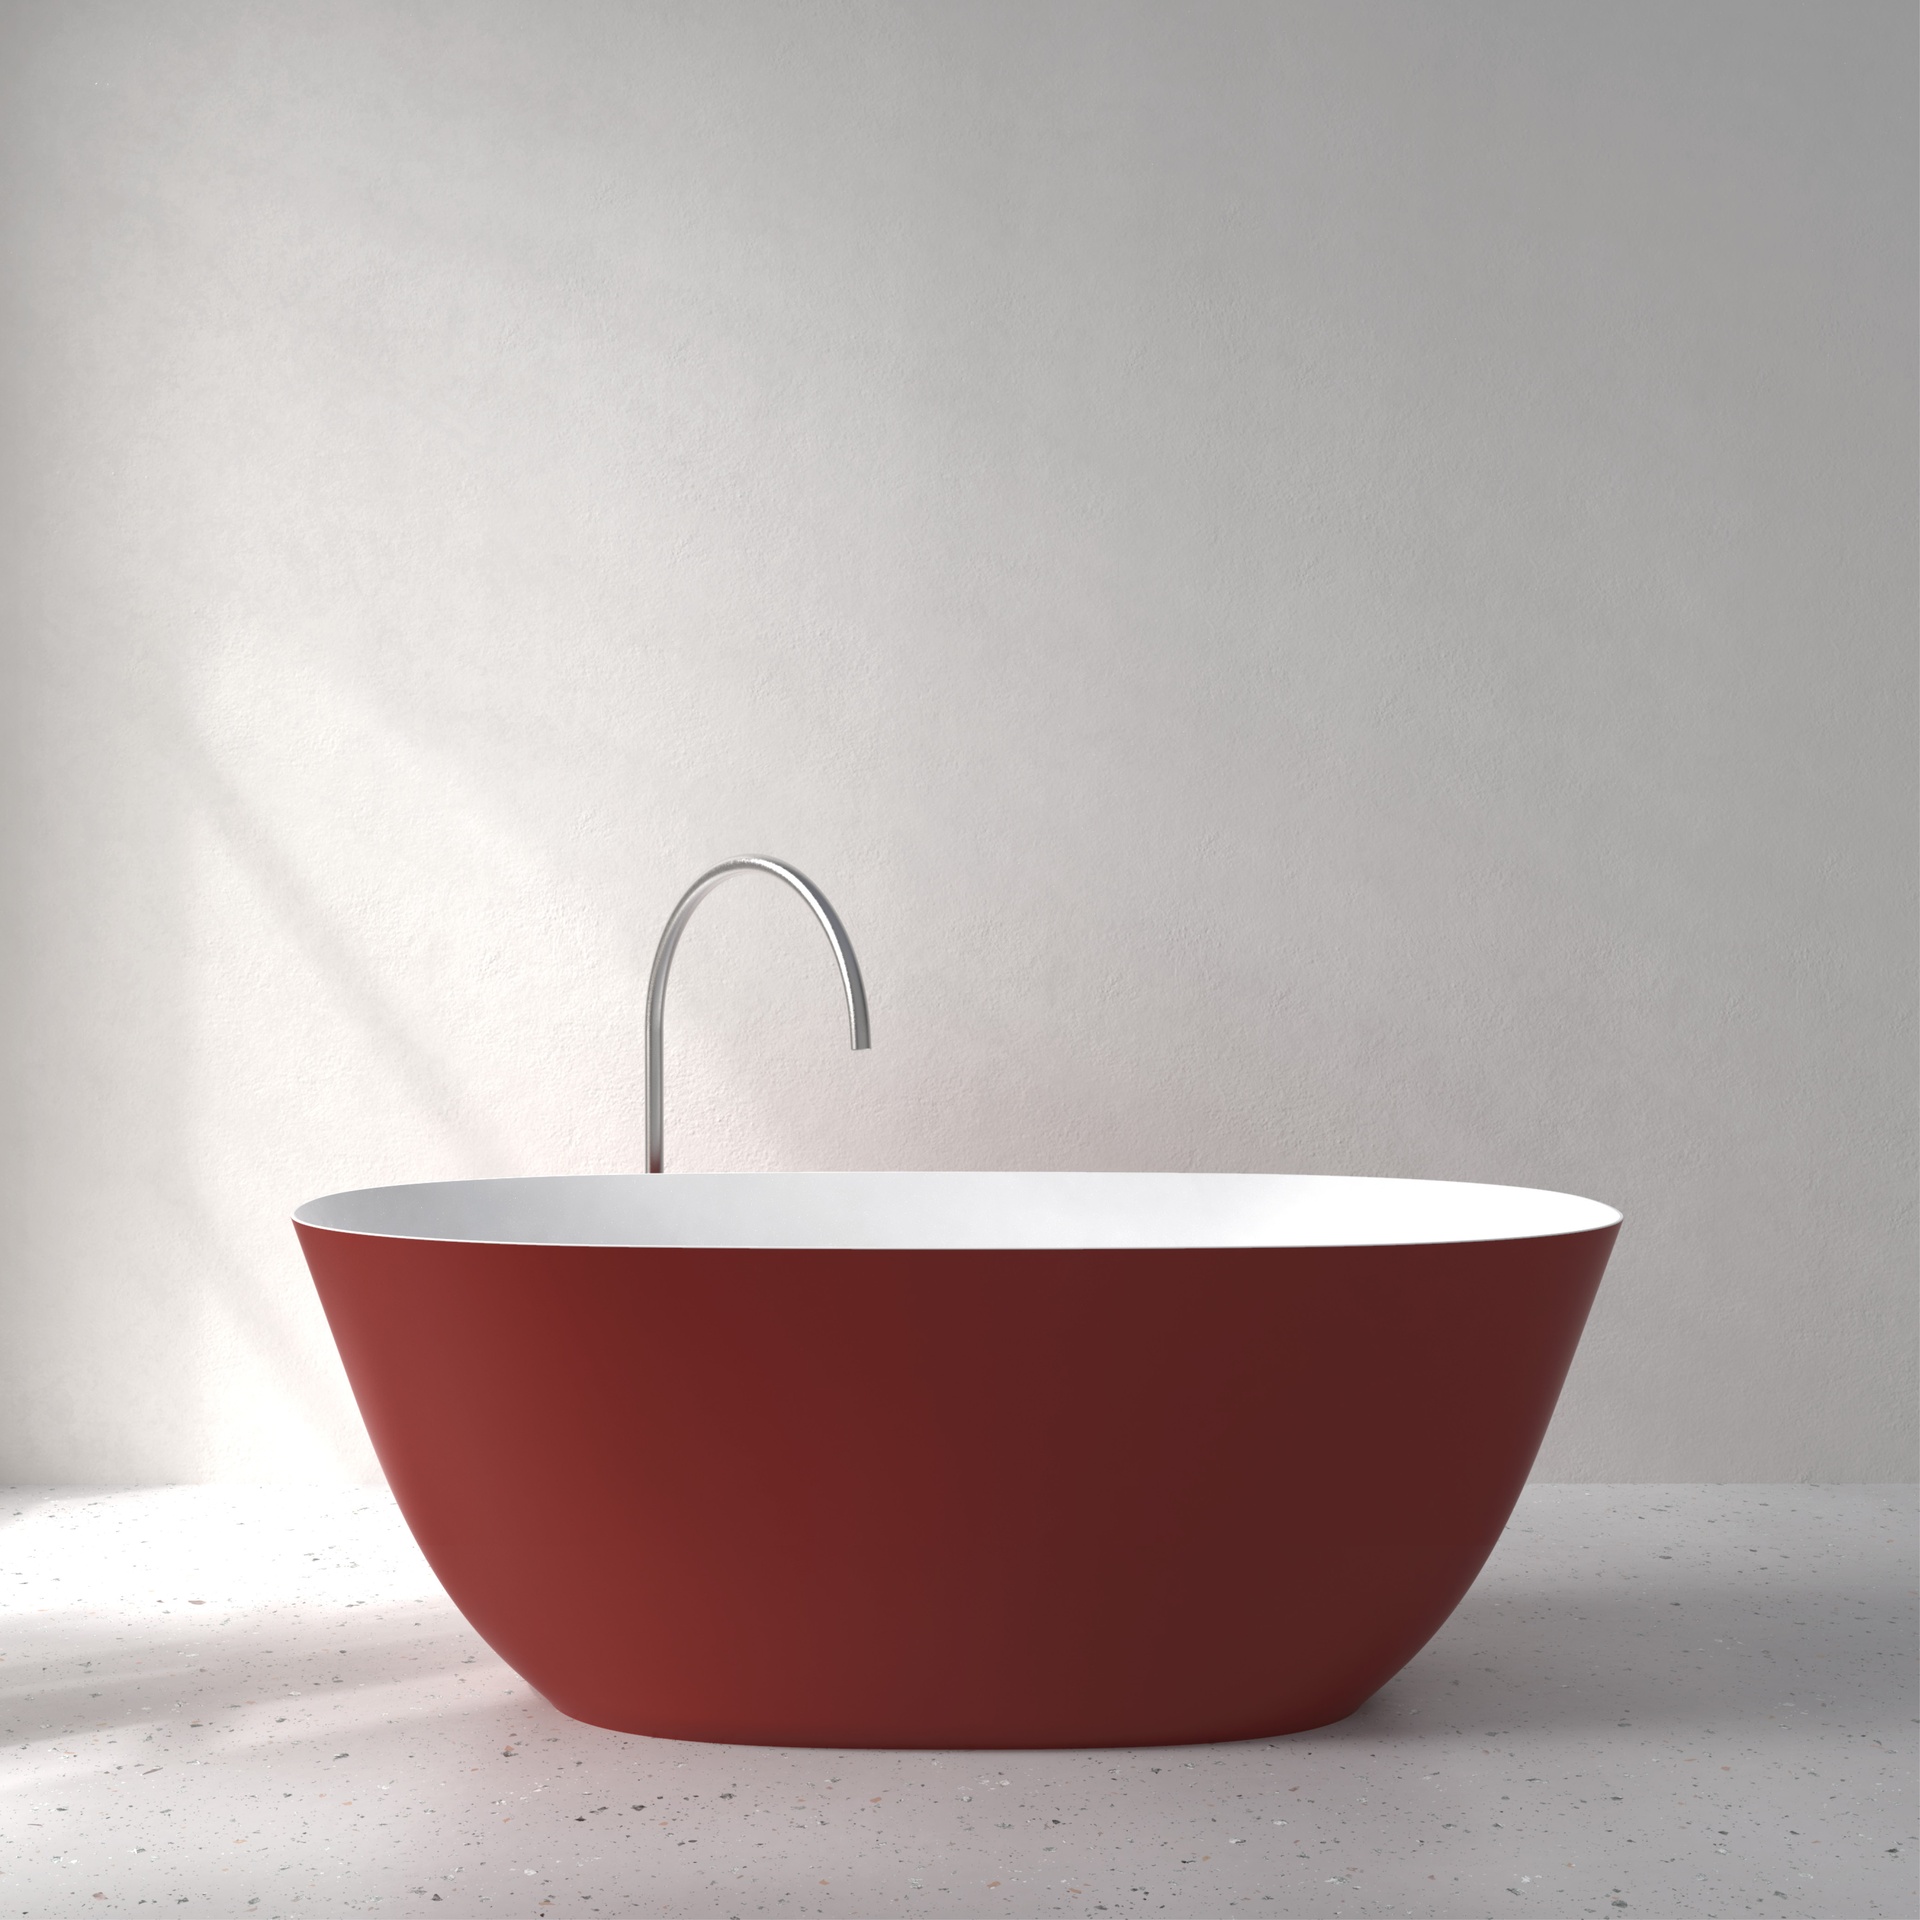 [FFI02-SRAL] Fine bath with Soft Touch (w1600 x d700 x h580mm, RAL color)